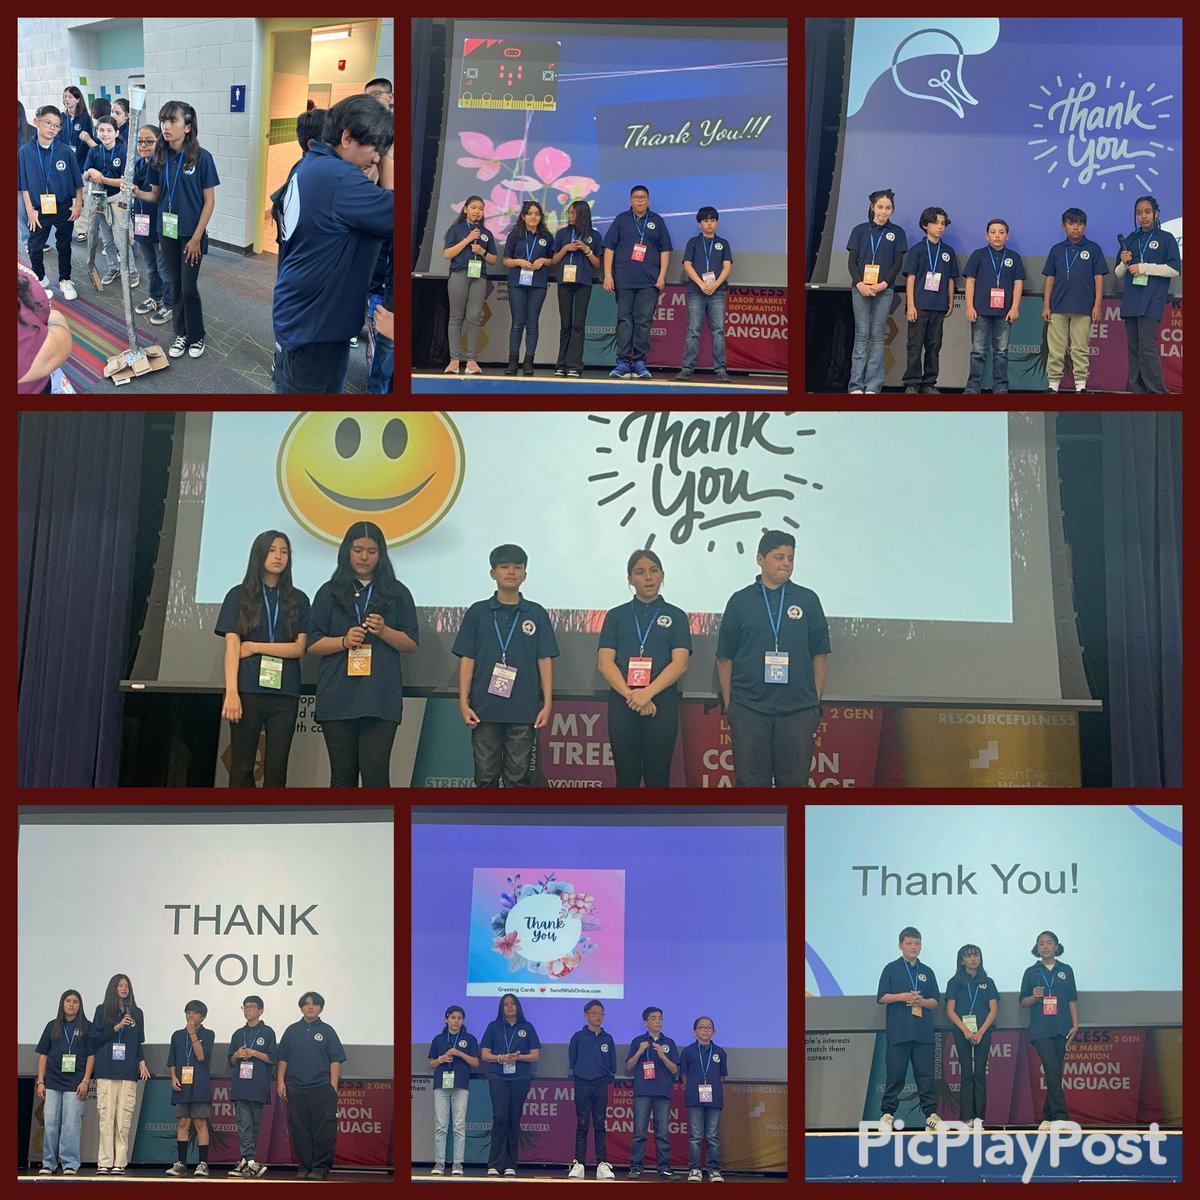 Demo Day 4 Maestra Godoy’s 5th/6th 🐺s presented their pitches and prototypes to @project_invent volunteer judge. What skills did you learn? Team work, resilience, communication & presentation skills. @BostoniaGlobal @CajonValleyUSD #somoslobos